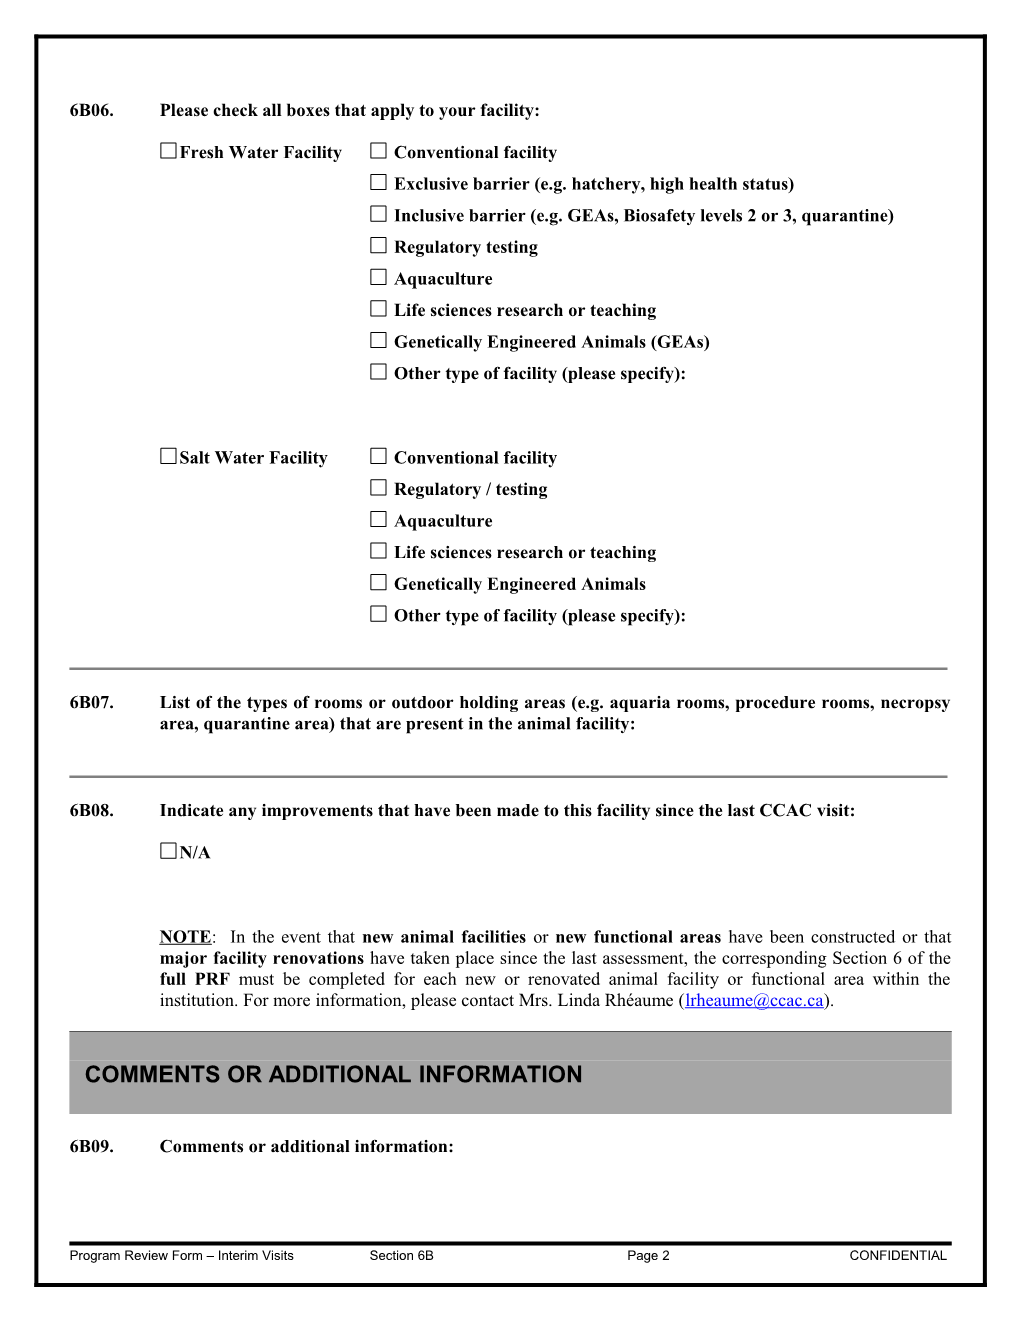 ANIMAL CARE and USE PROGRAM REVIEW FORM (For Interim Visits)